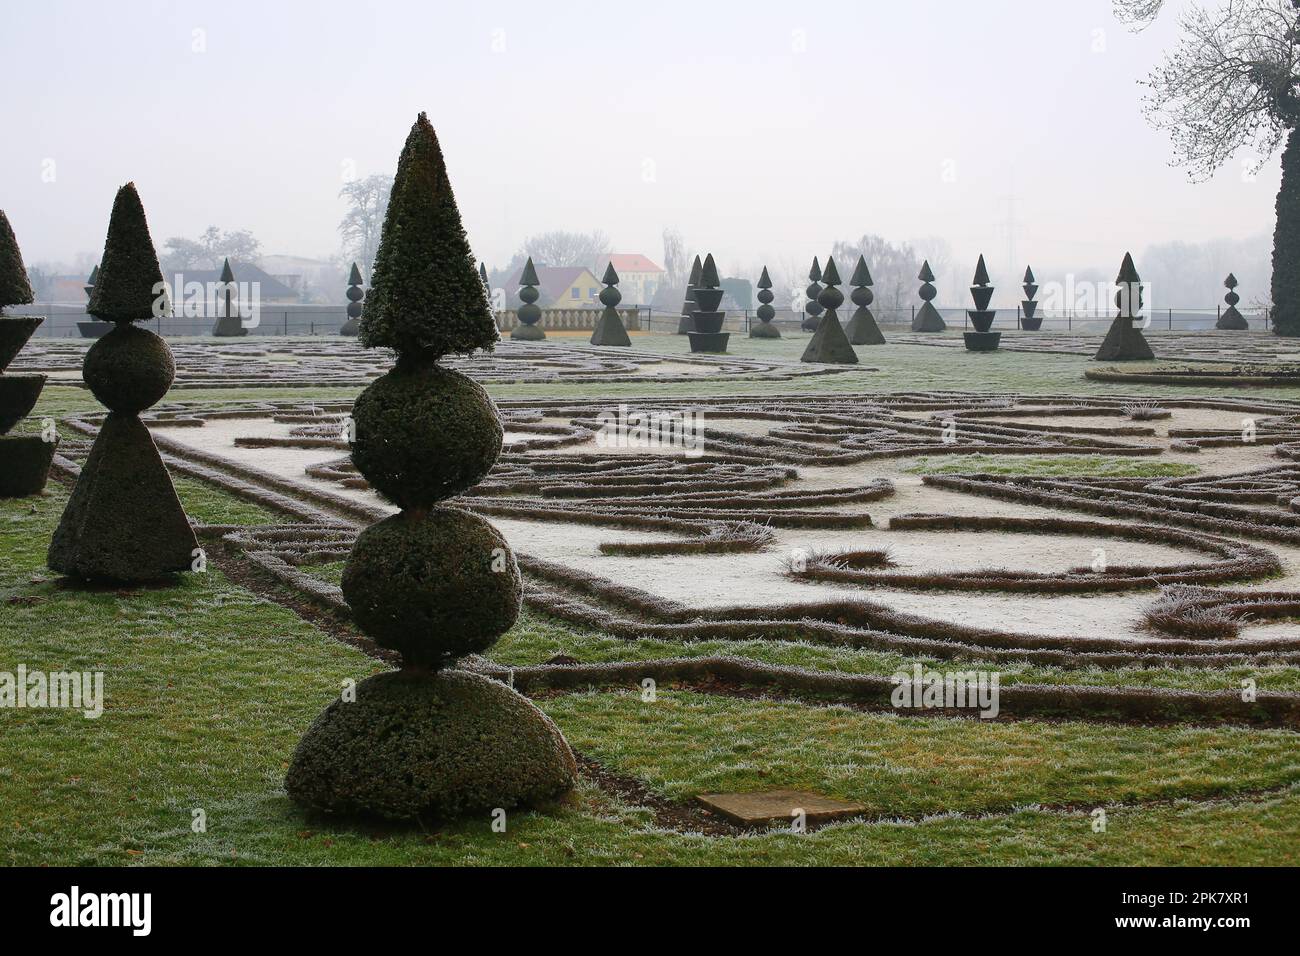 Topiary yews with pyramid and ball shapes in winterly palace garden. Stock Photo